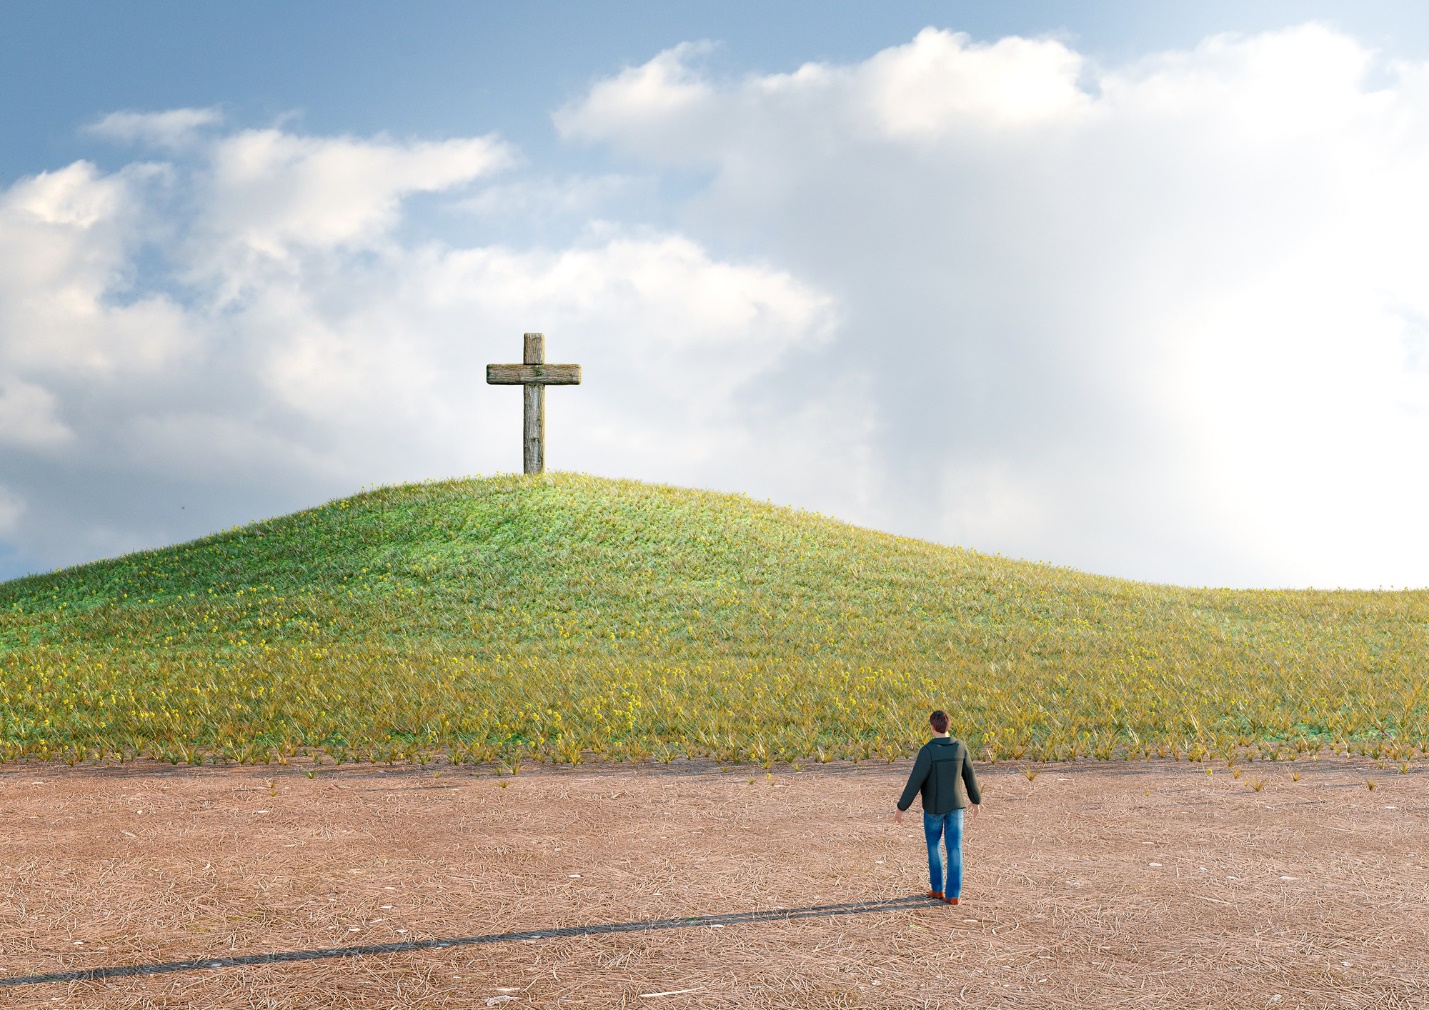 A person walking on a hill with a cross on top

Description automatically generated with low confidence